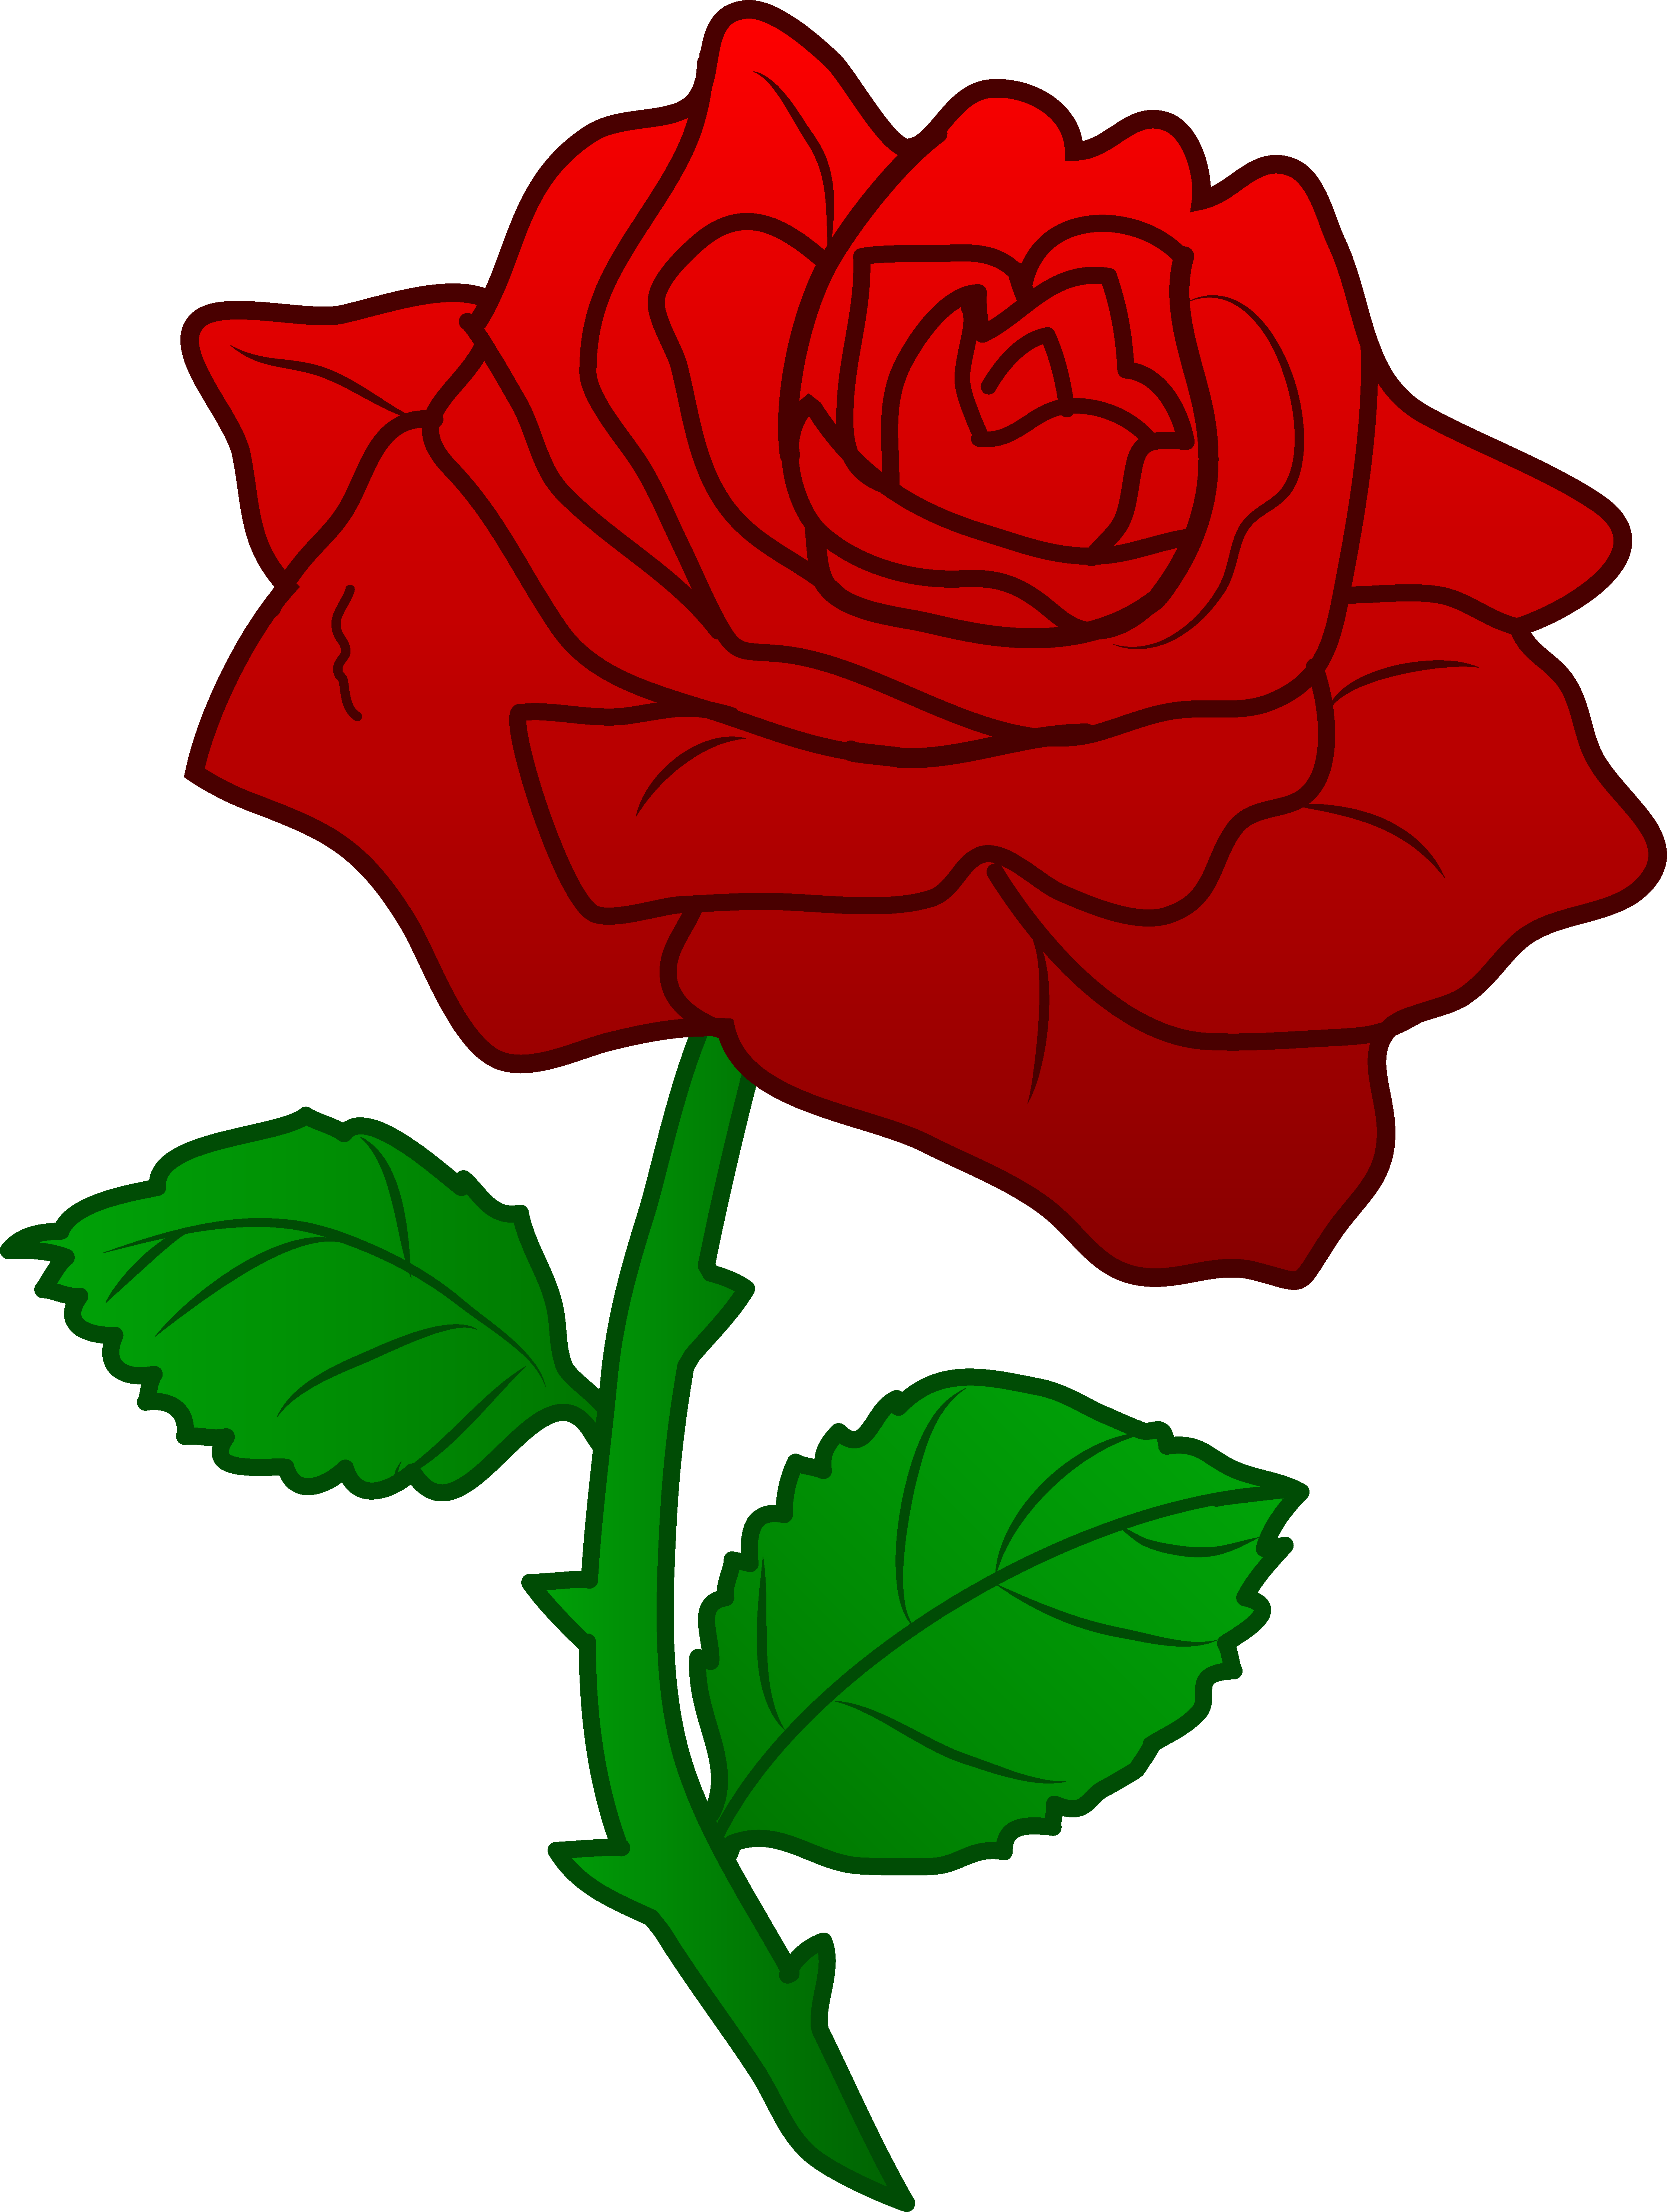 Clipart pictures of roses - ClipartFox